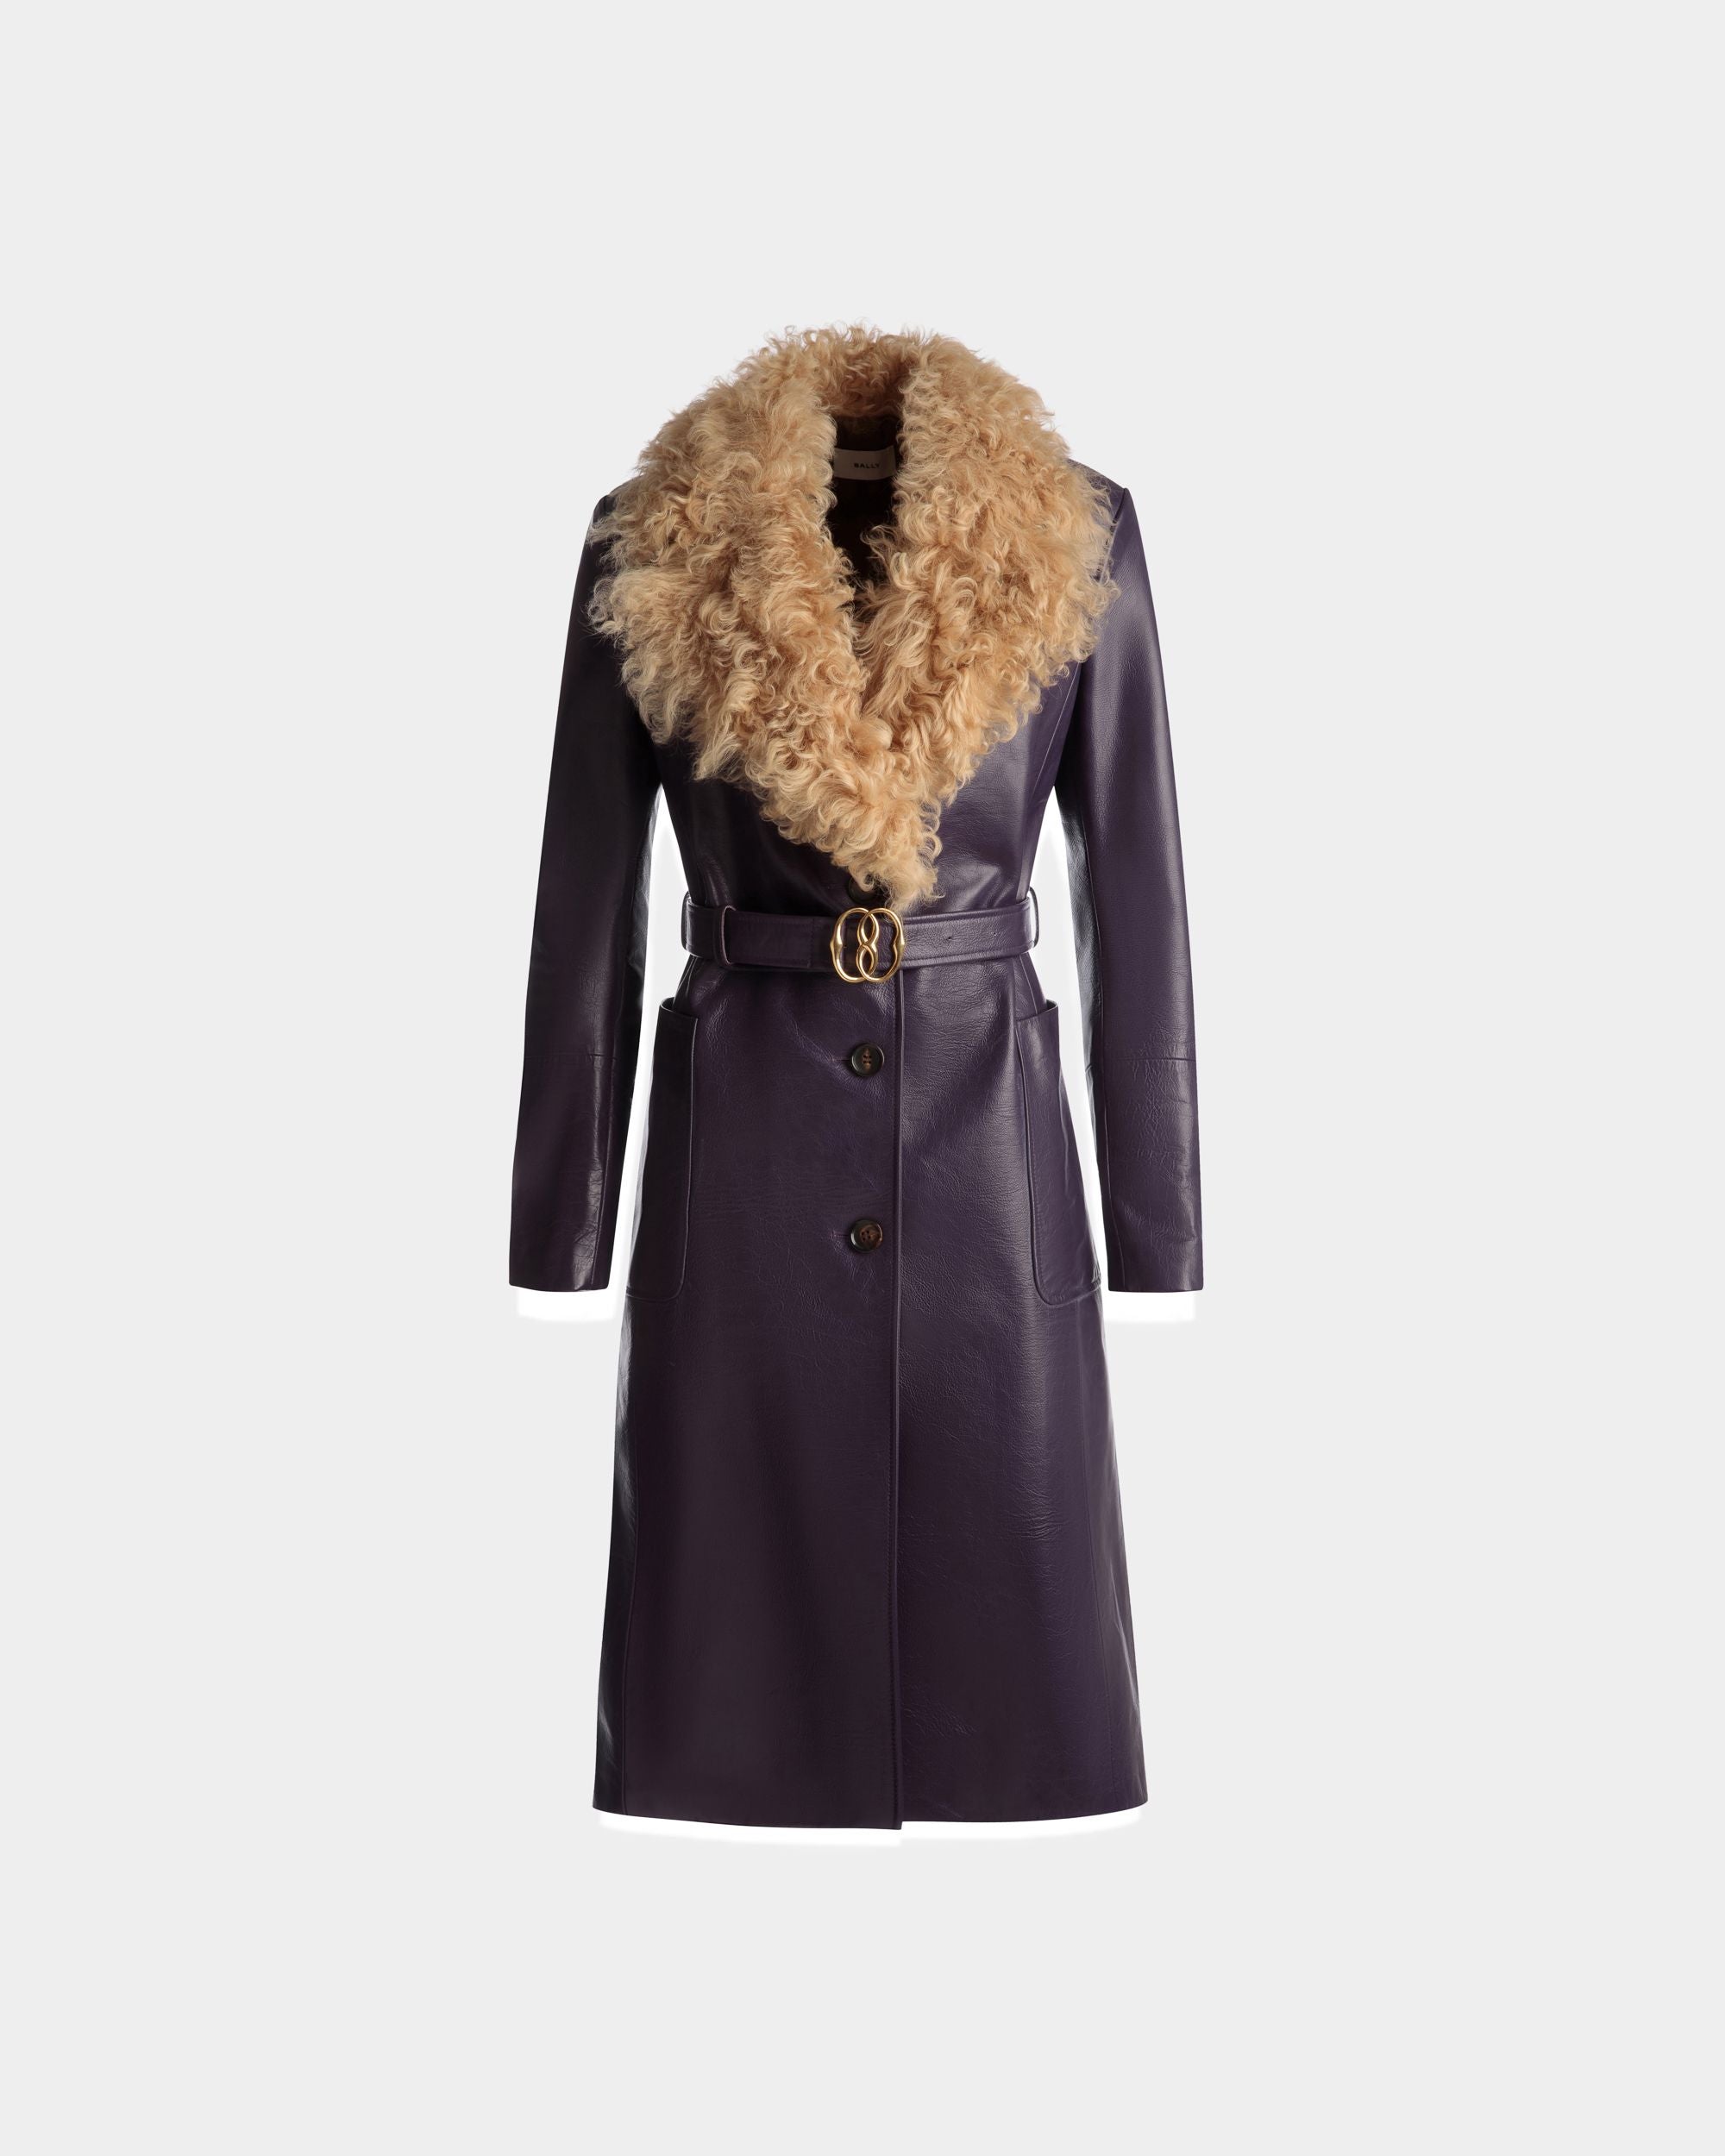 Fur Collar Coat | Women's Outerwear | Orchid Leather | Bally | Still Life Front